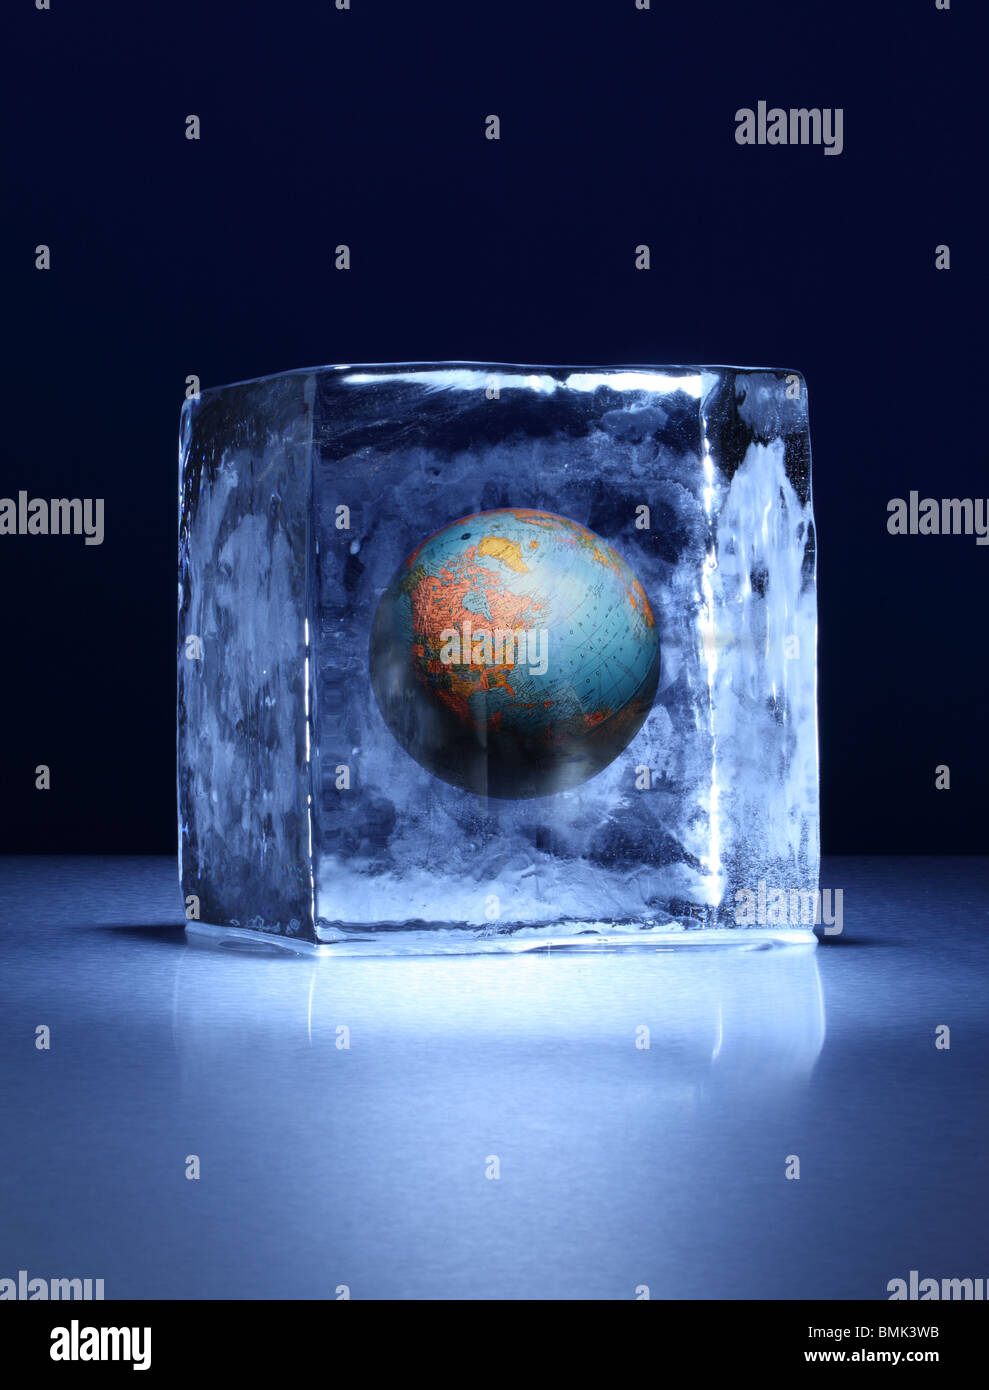 A frozen block of ice with a world globe frozen inside on a metal surface Stock Photo